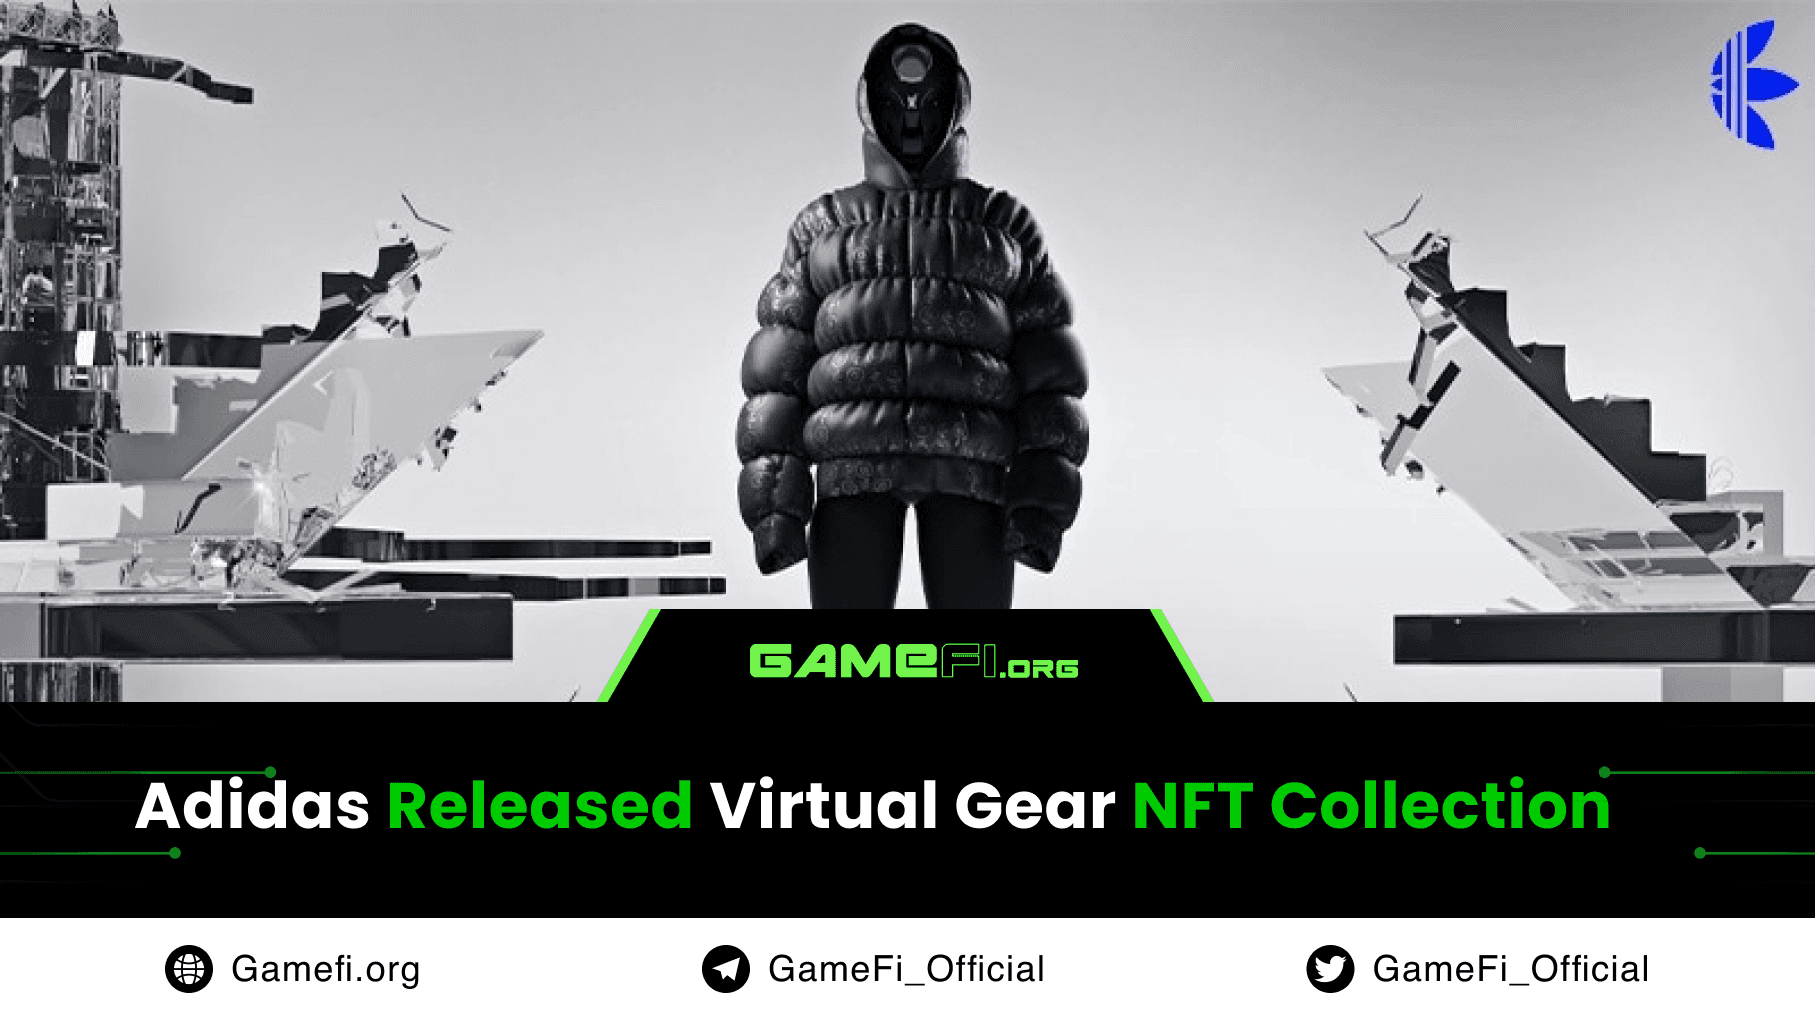 Adidas Released Virtual Gear NFT Collection